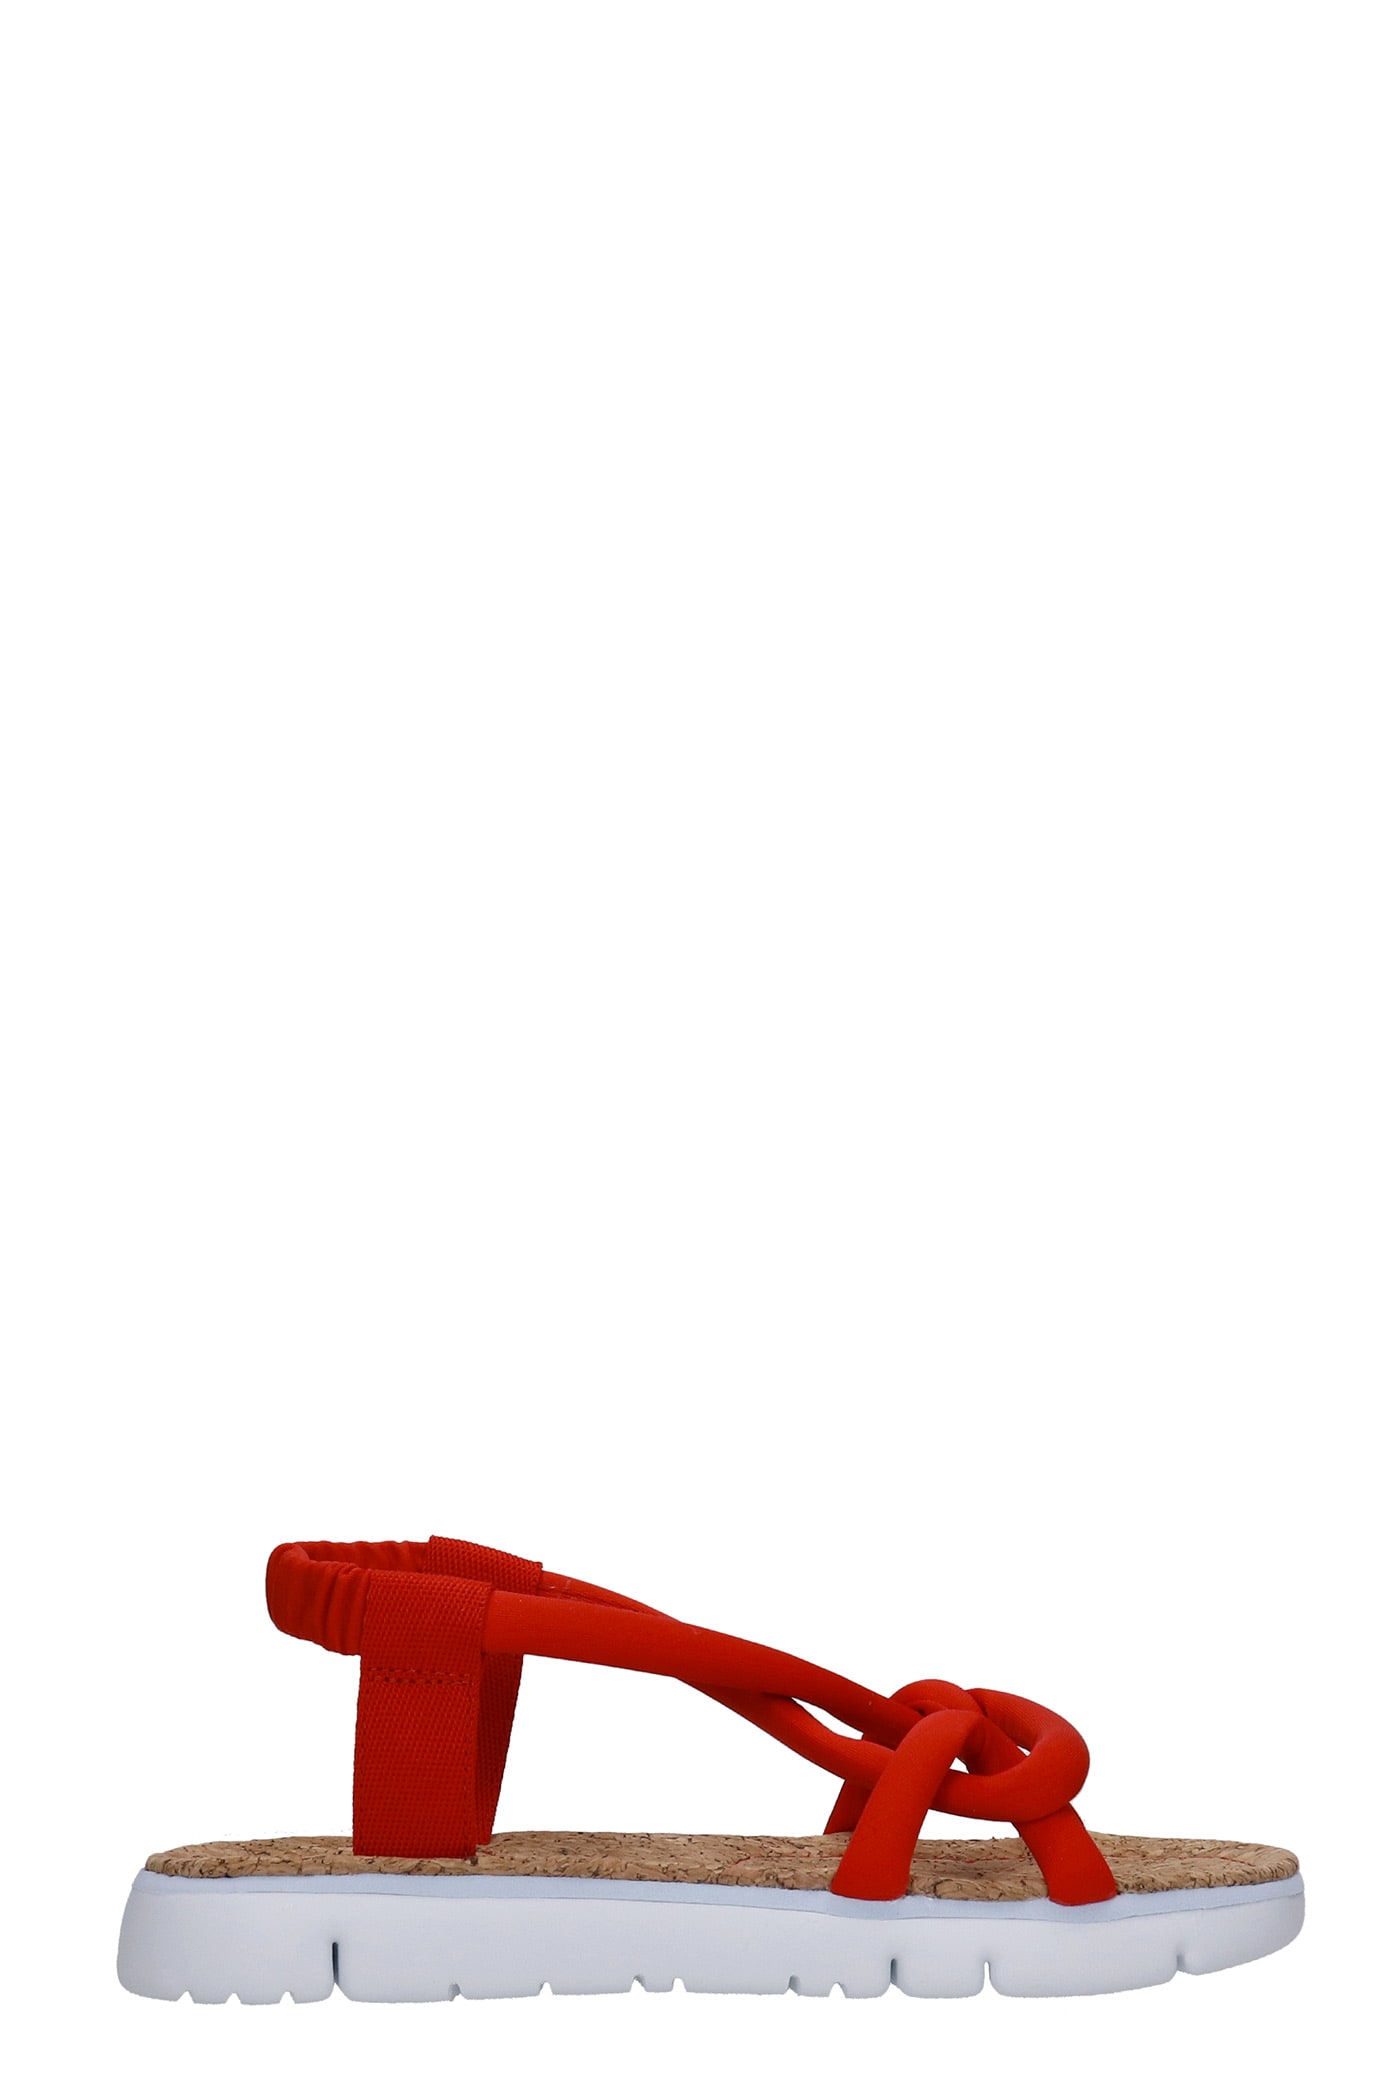 Buy Camper Oruga Flats In Red Synthetic Fibers online, shop Camper shoes with free shipping